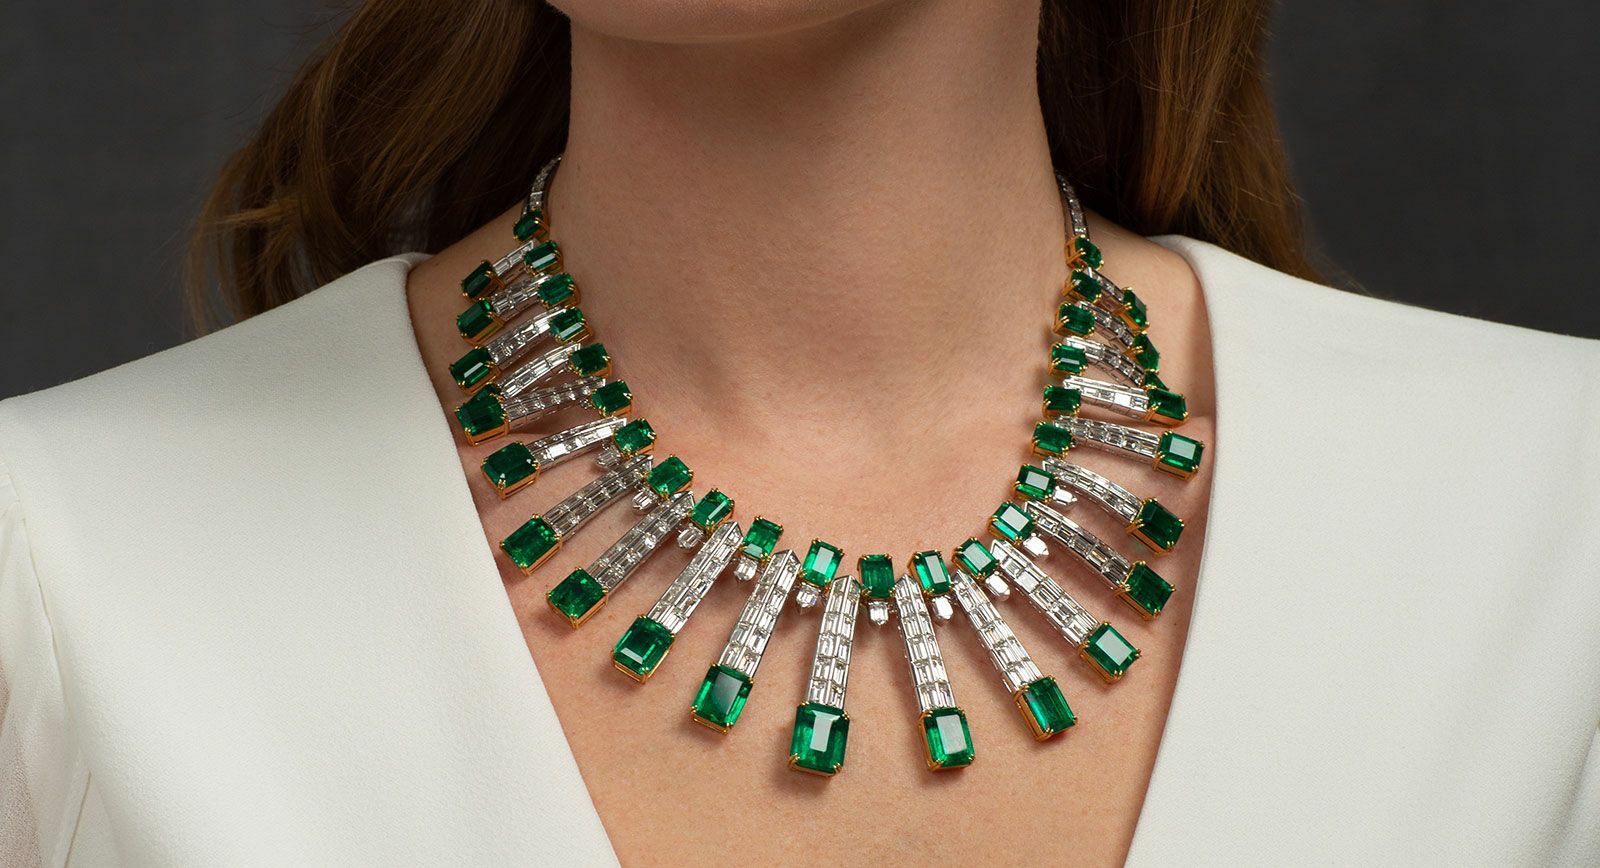 Regality & Co necklace with 104 carats of no-oil Colombian emeralds and 50 carats of diamonds